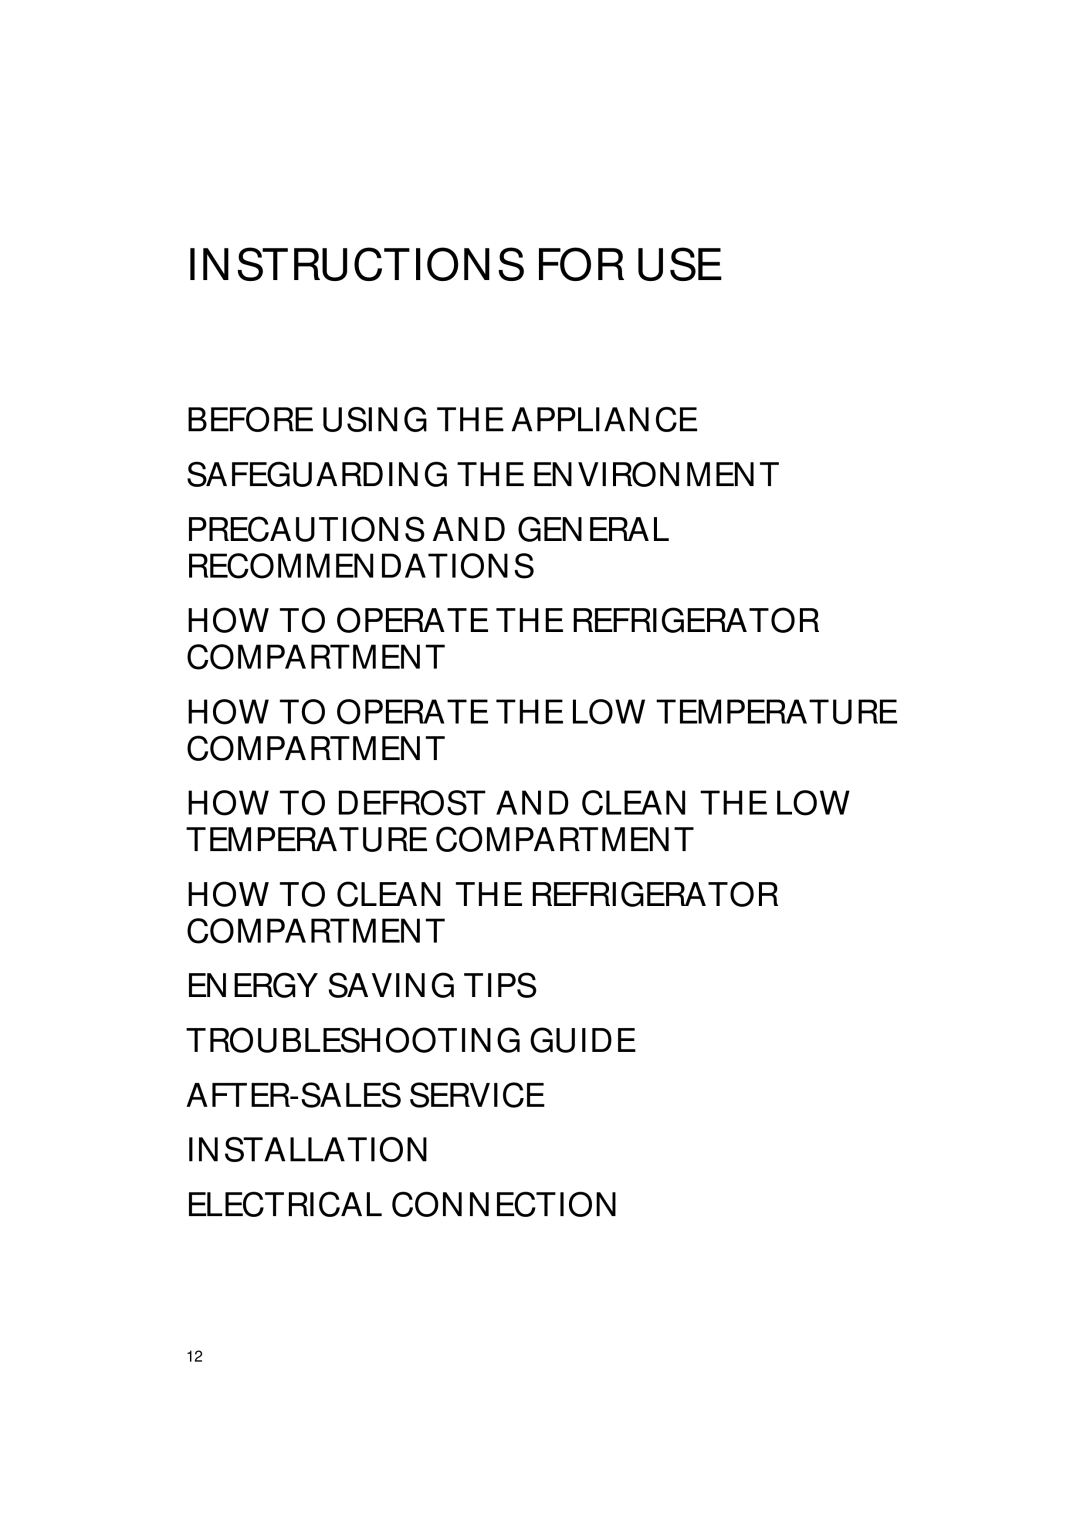 Smeg FR148A1 manual Before Using The Appliance Safeguarding The Environment, Precautions And General Recommendations 